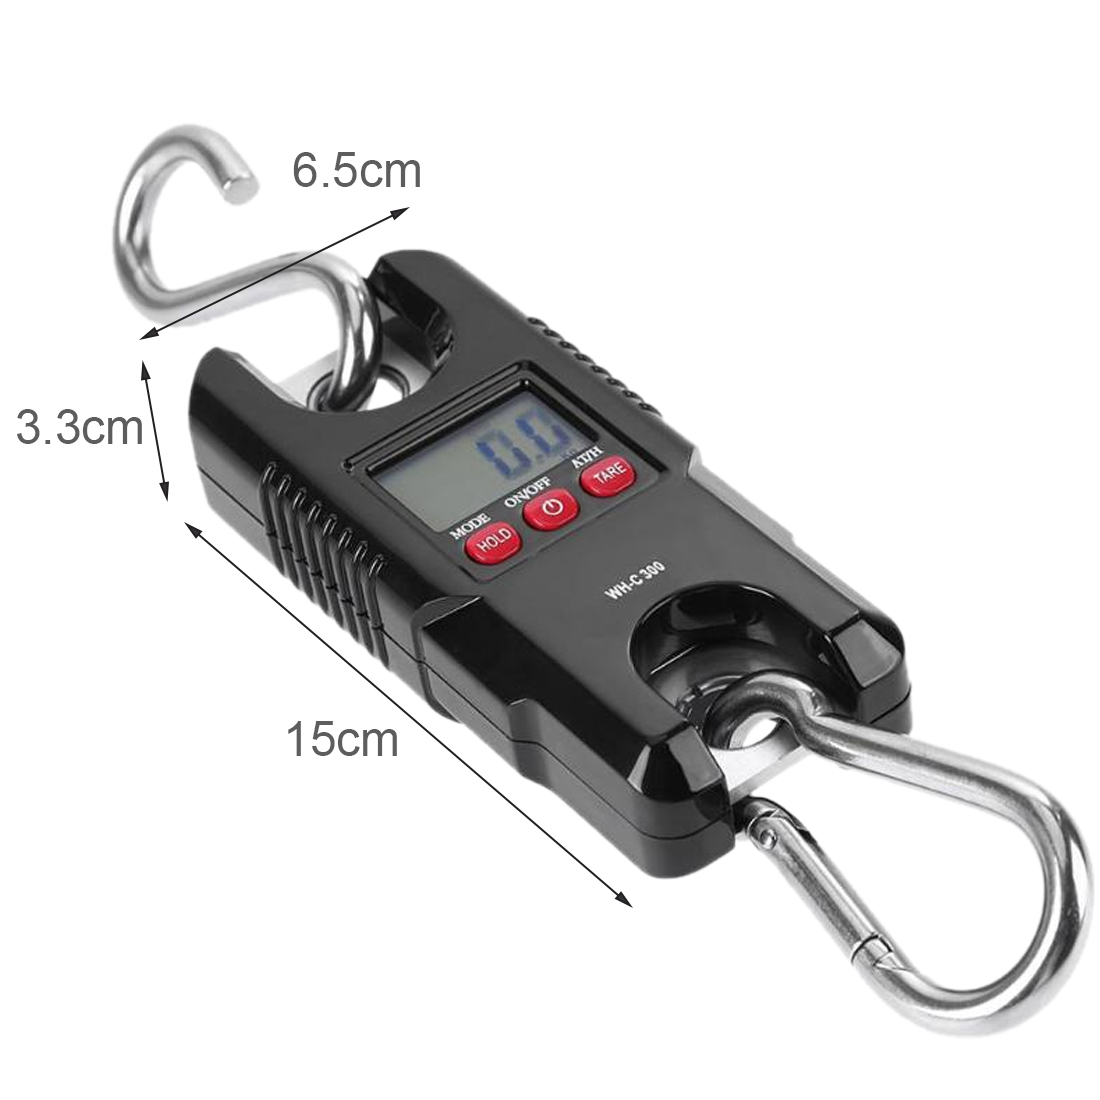 300kg 100g Crane Scale Electronic Balance Portable Mini Heavy Duty LCD Digital Scales Fishing Hanging Hook Weight Scales